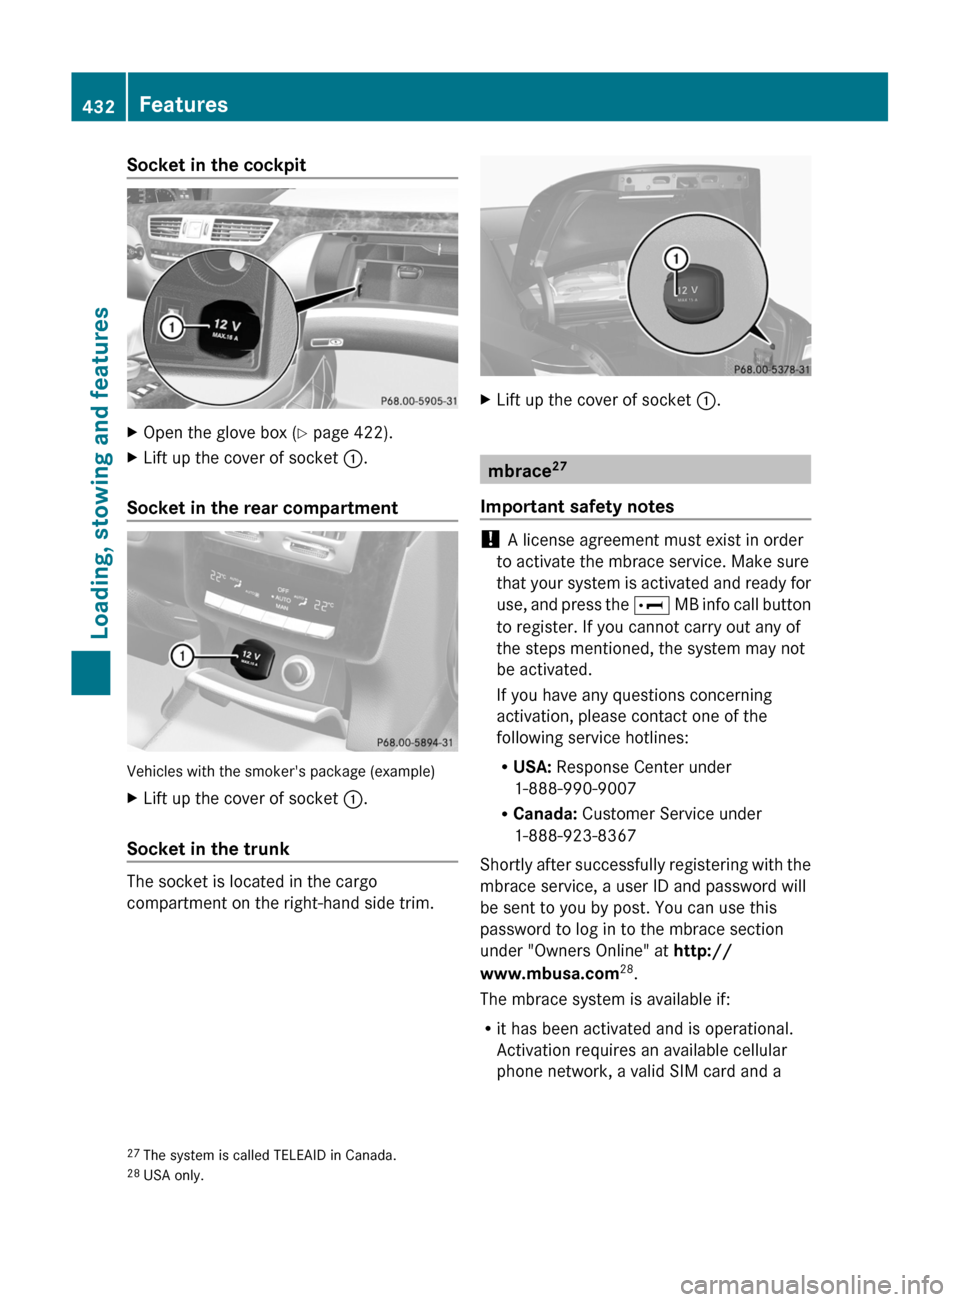 MERCEDES-BENZ S-Class 2011 W221 User Guide Socket in the cockpitXOpen the glove box (Y page 422).XLift up the cover of socket :.
Socket in the rear compartment
Vehicles with the smokers package (example)
XLift up the cover of socket :.
Socket